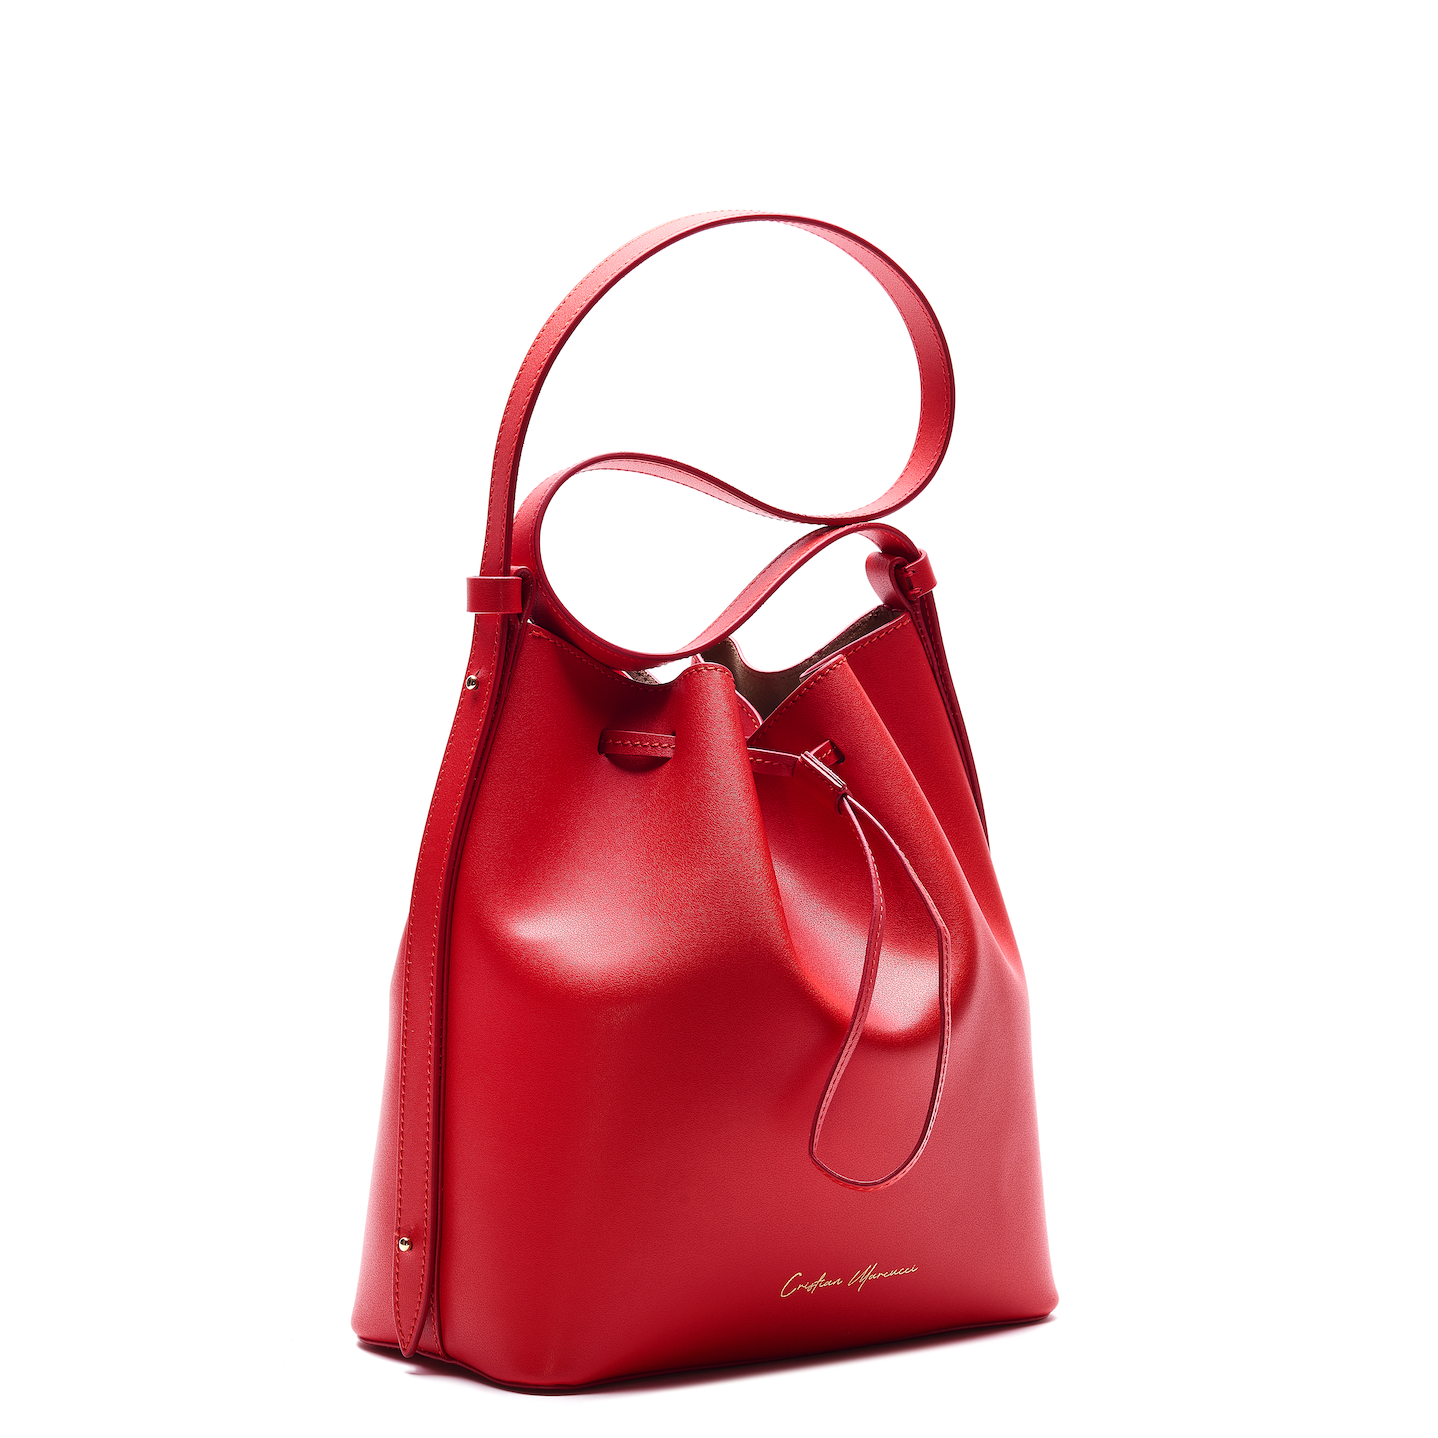 Sandra, crafted by expert artisans at Cristian Marcucci, is the essential, soft, glamorous and timeless bucket bag. It is made of smooth leather and has hand-painted profiles, which adds to its sophistication. The microsuede interior is a luxurious touch .  At Mazzi d Fiori